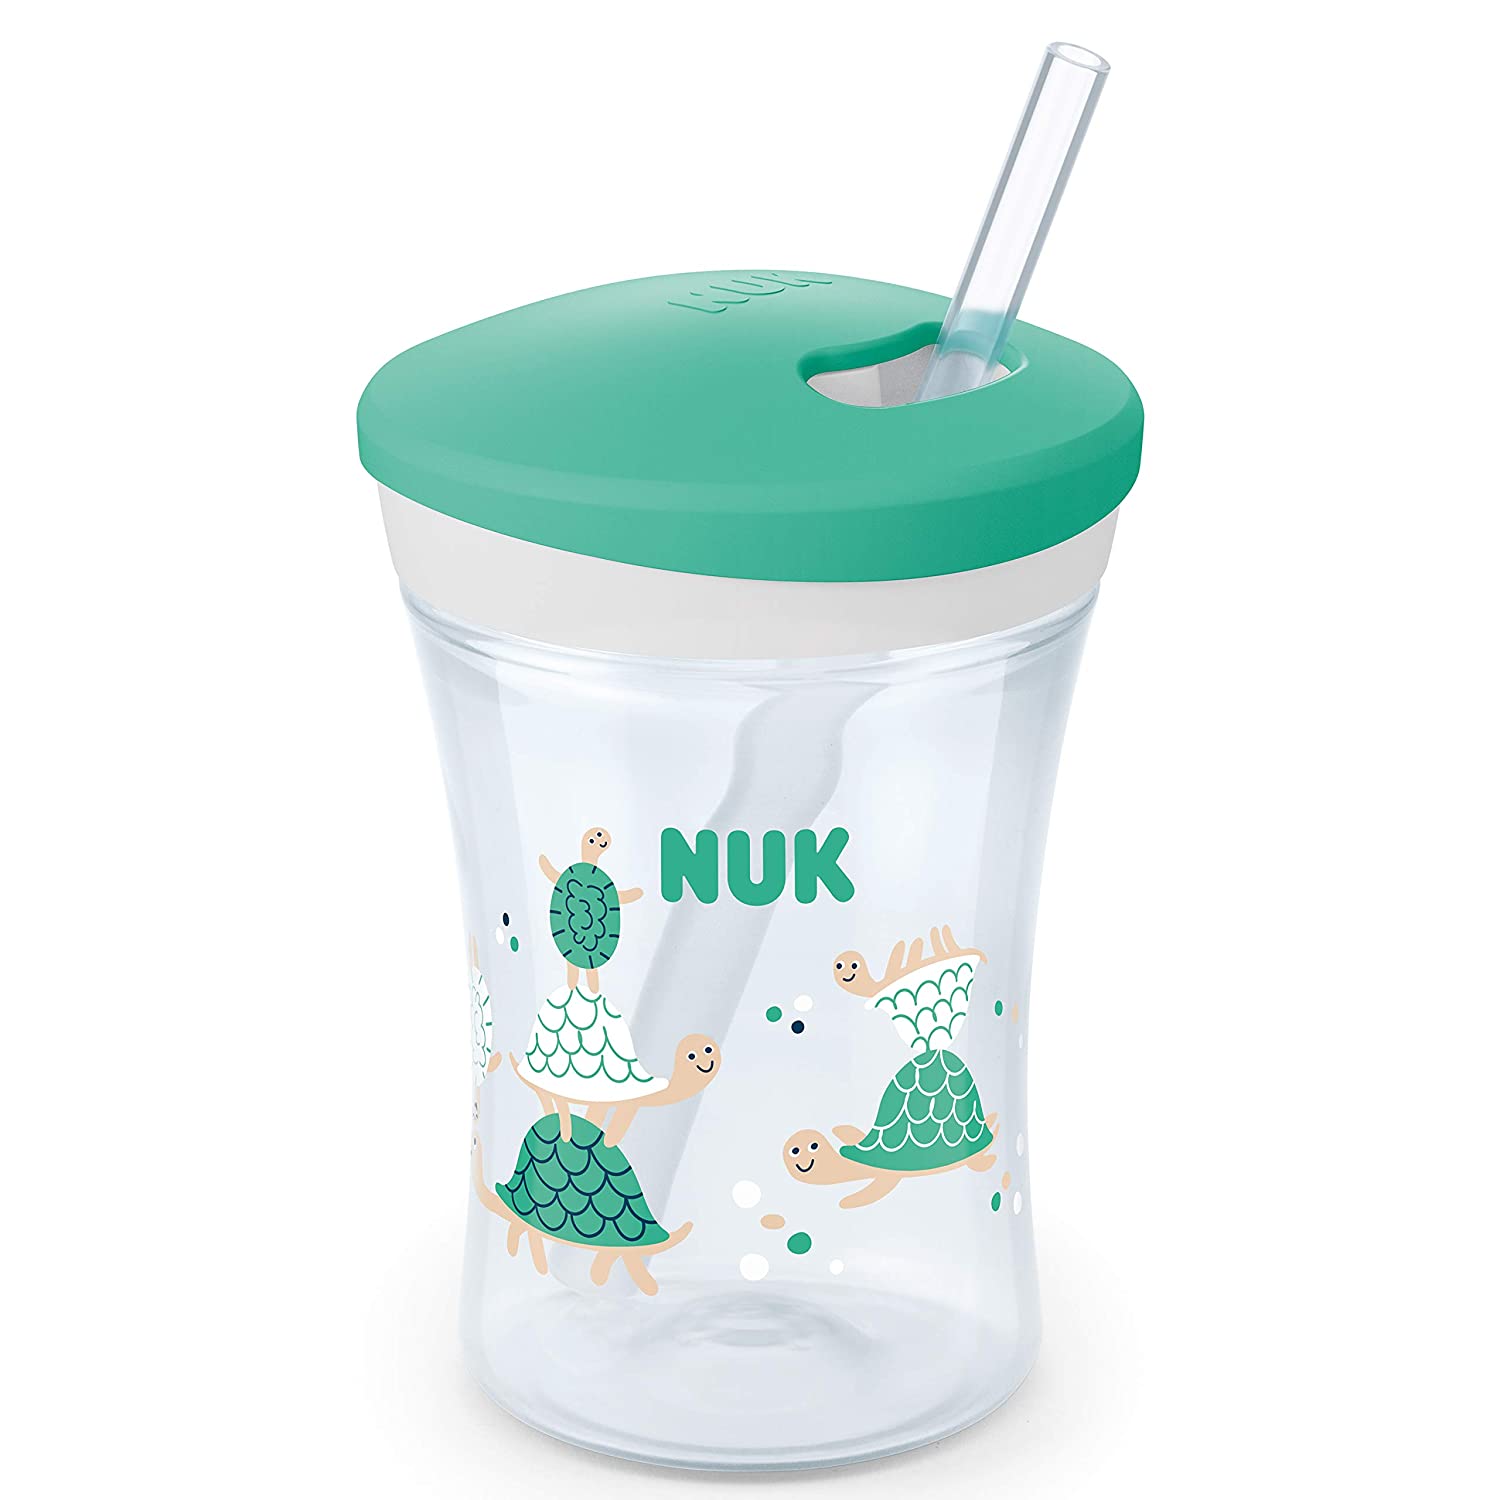 NUK Action Cup Drinking Bottle, Soft Straw, Leak-Proof, 12+ Months, BPA-Free, 230 ml, Dogs, Purple